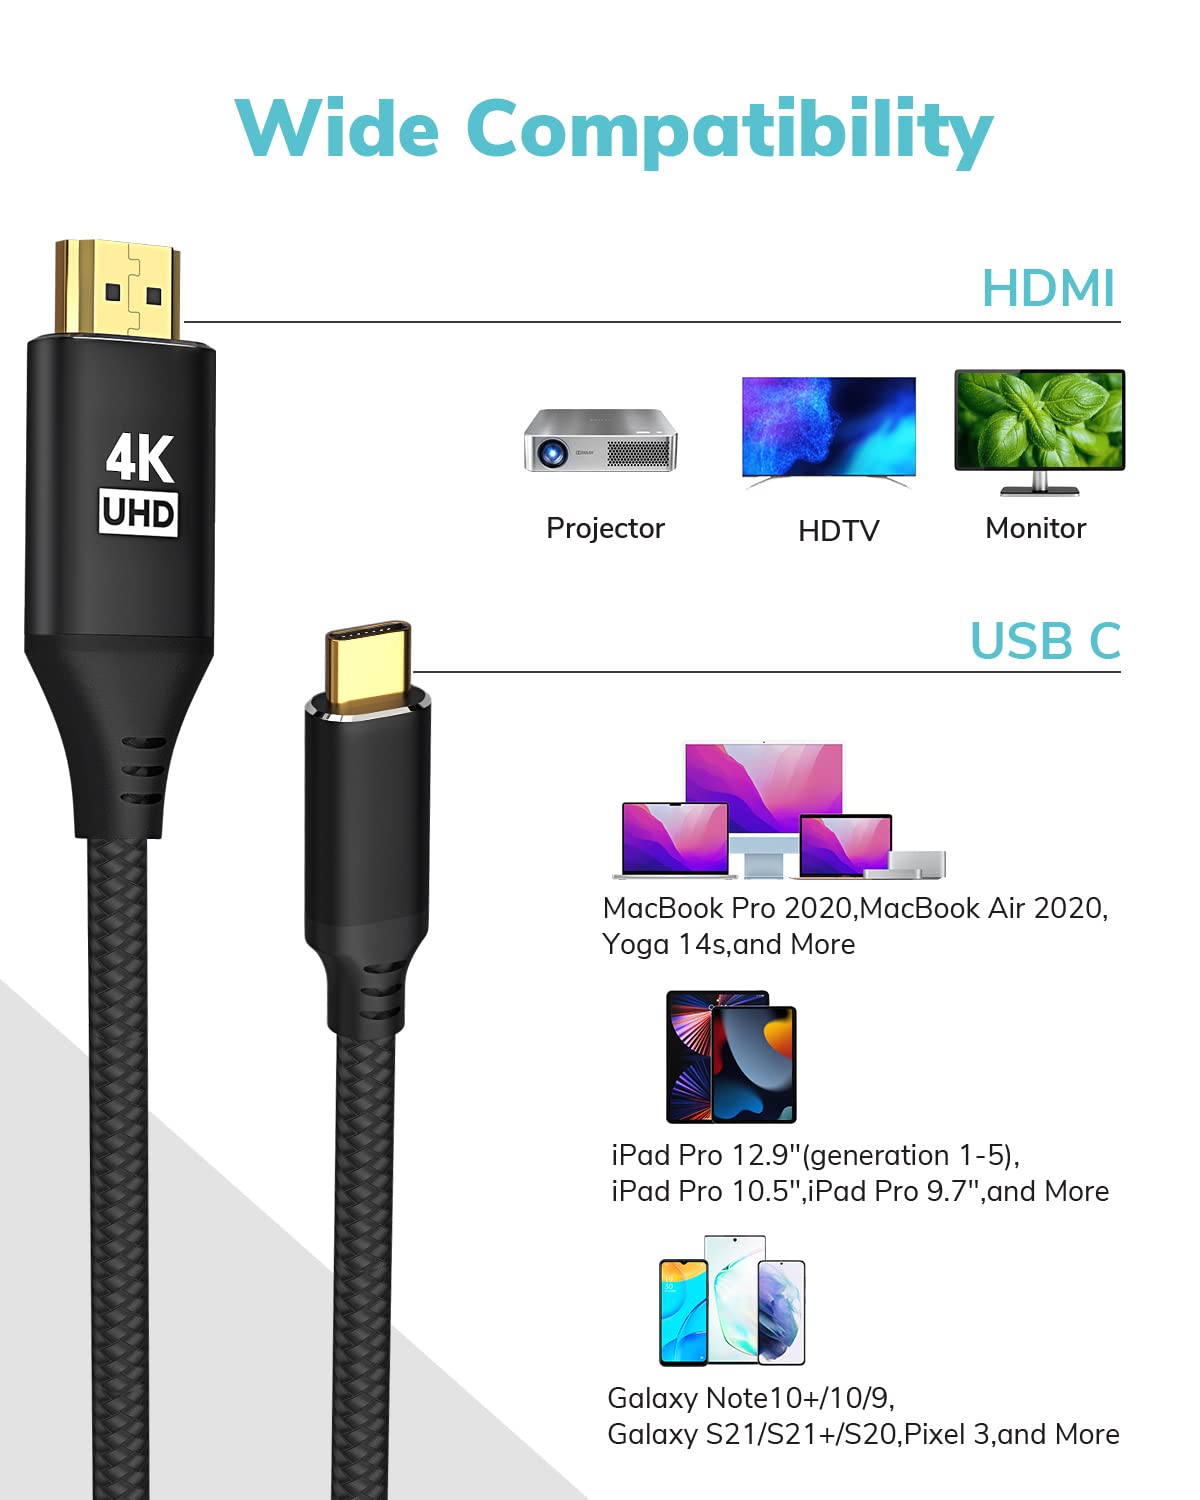 USB C to HDMI Cable 10Ft 4K@60Hz, High-Speed USB Type C to HDMI Cable for Home Office, [Thunderbolt 3 Compatible] for MacBook Pro/Air 2020, iPad Air 4, iPad Pro 2021, iMac, S20, XPS 15, and More